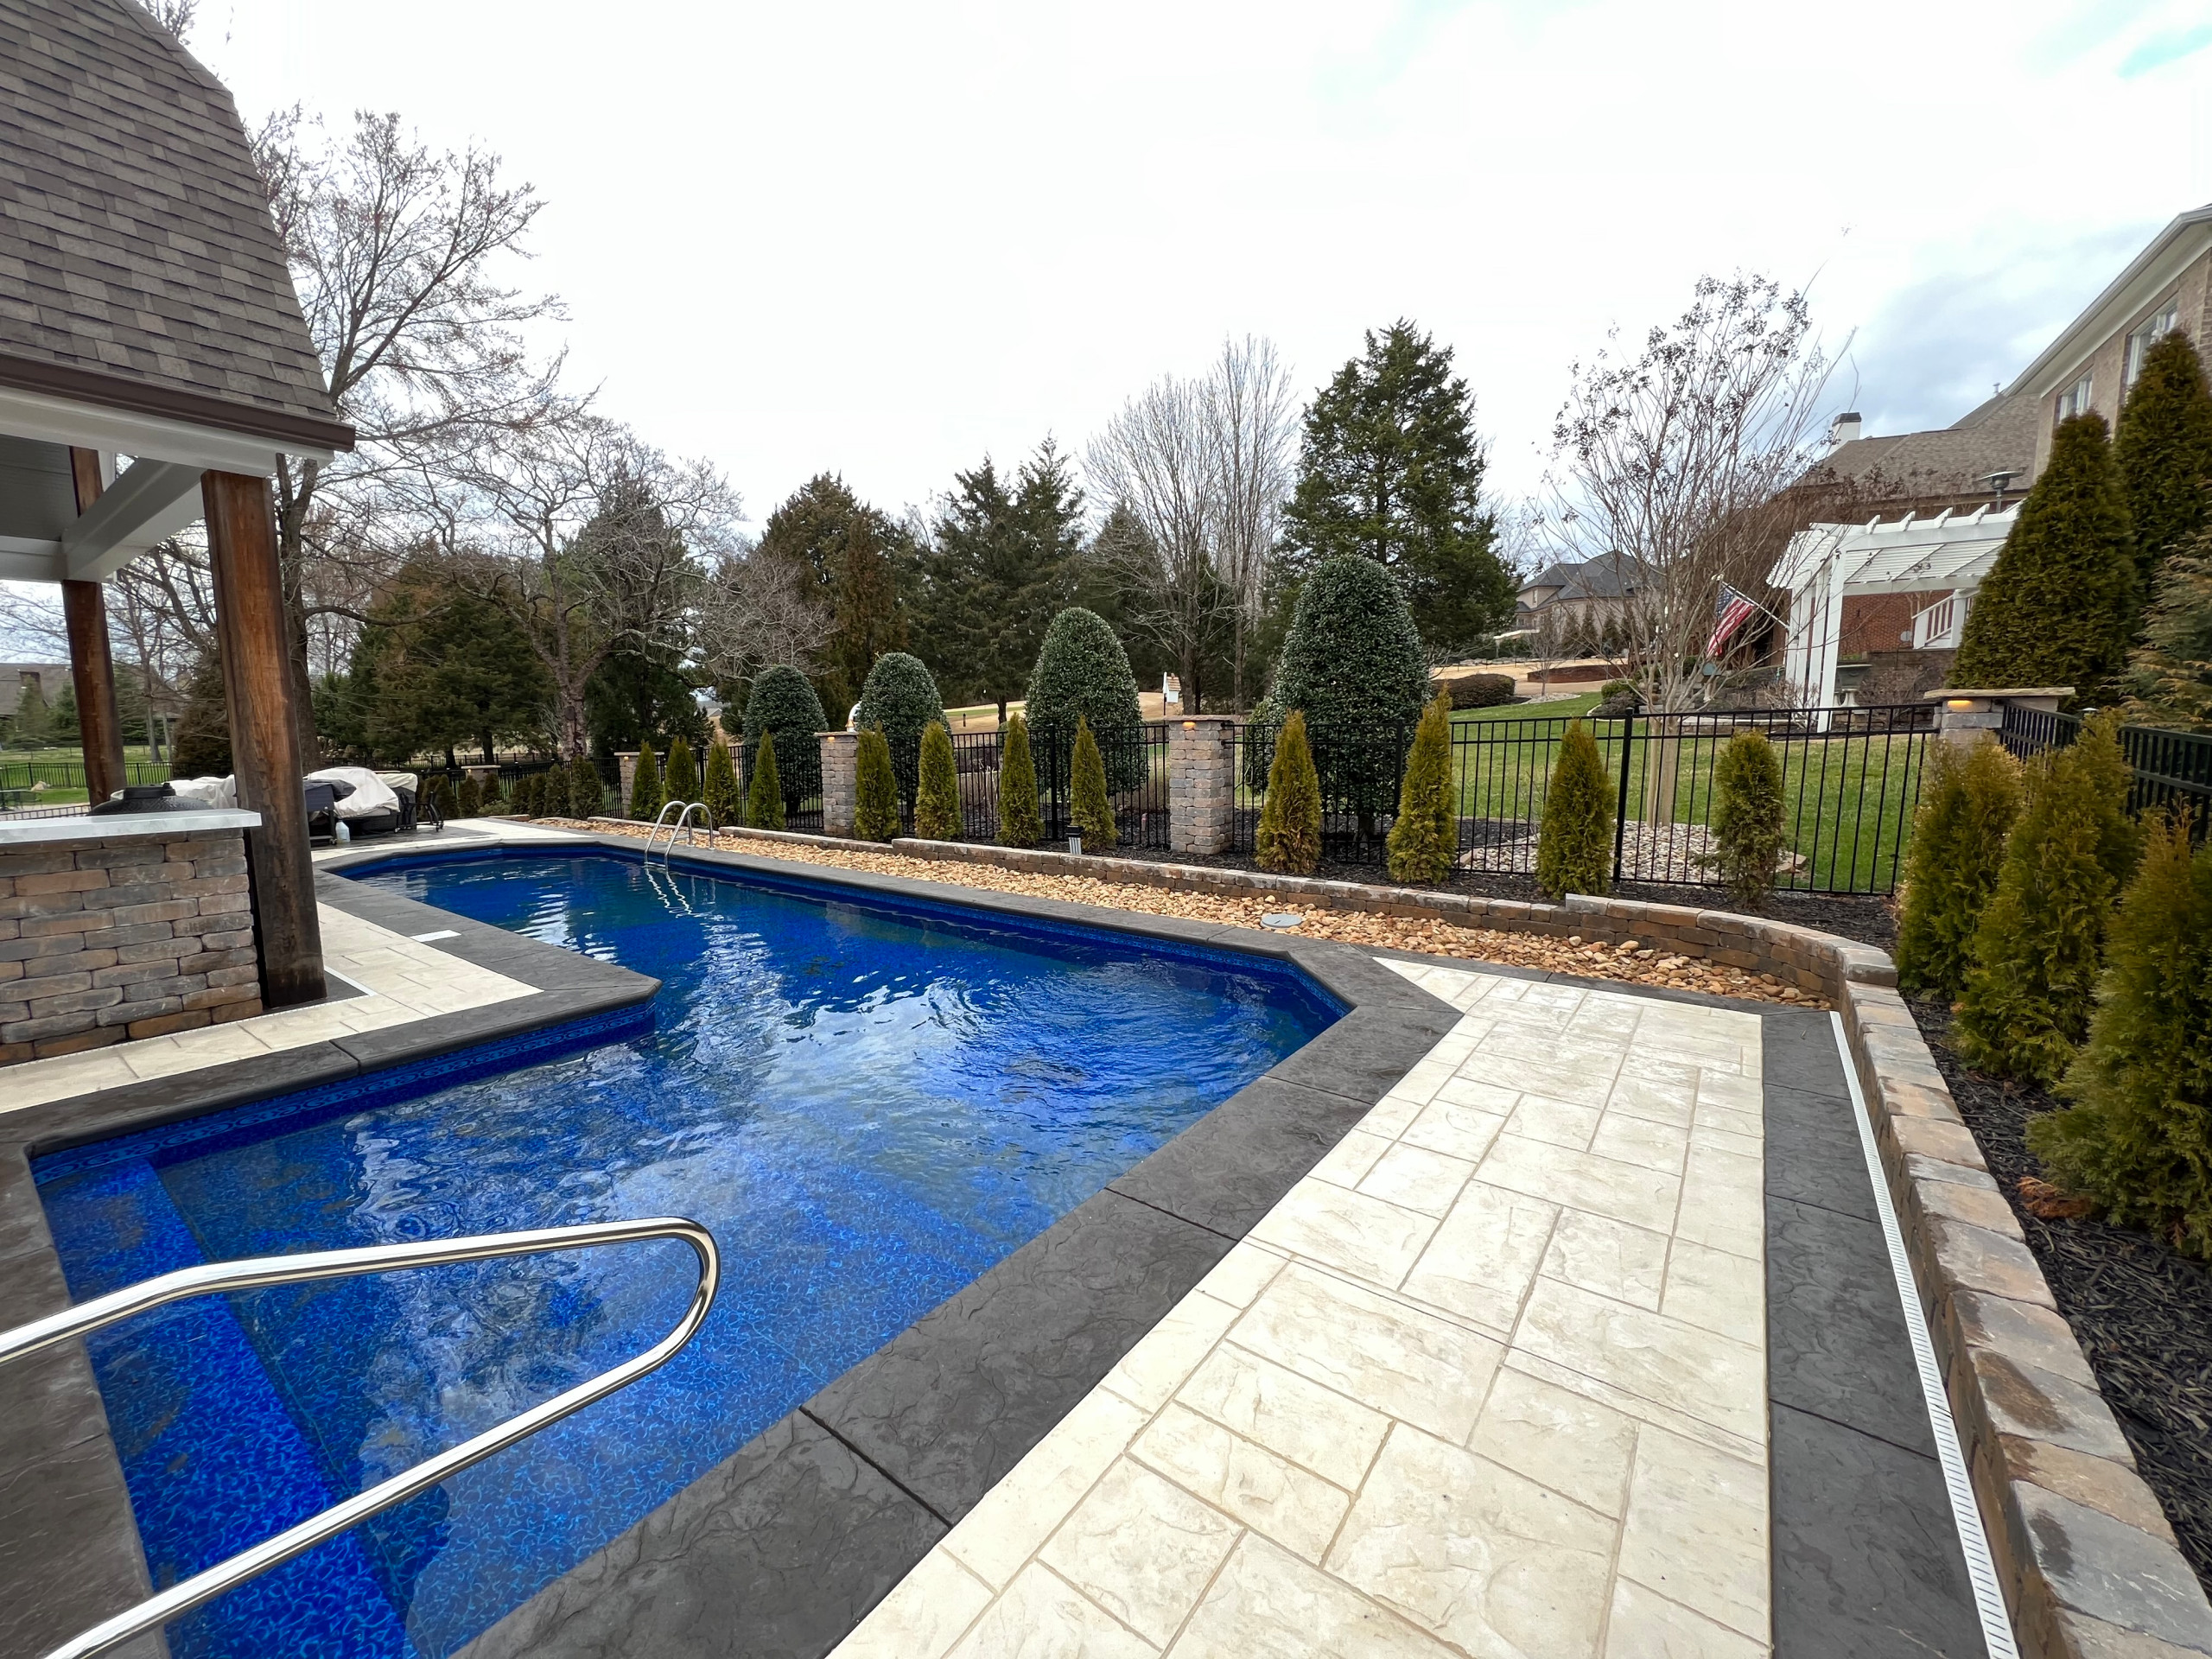 Outdoor kitchen/ fireplace and pool landscaping